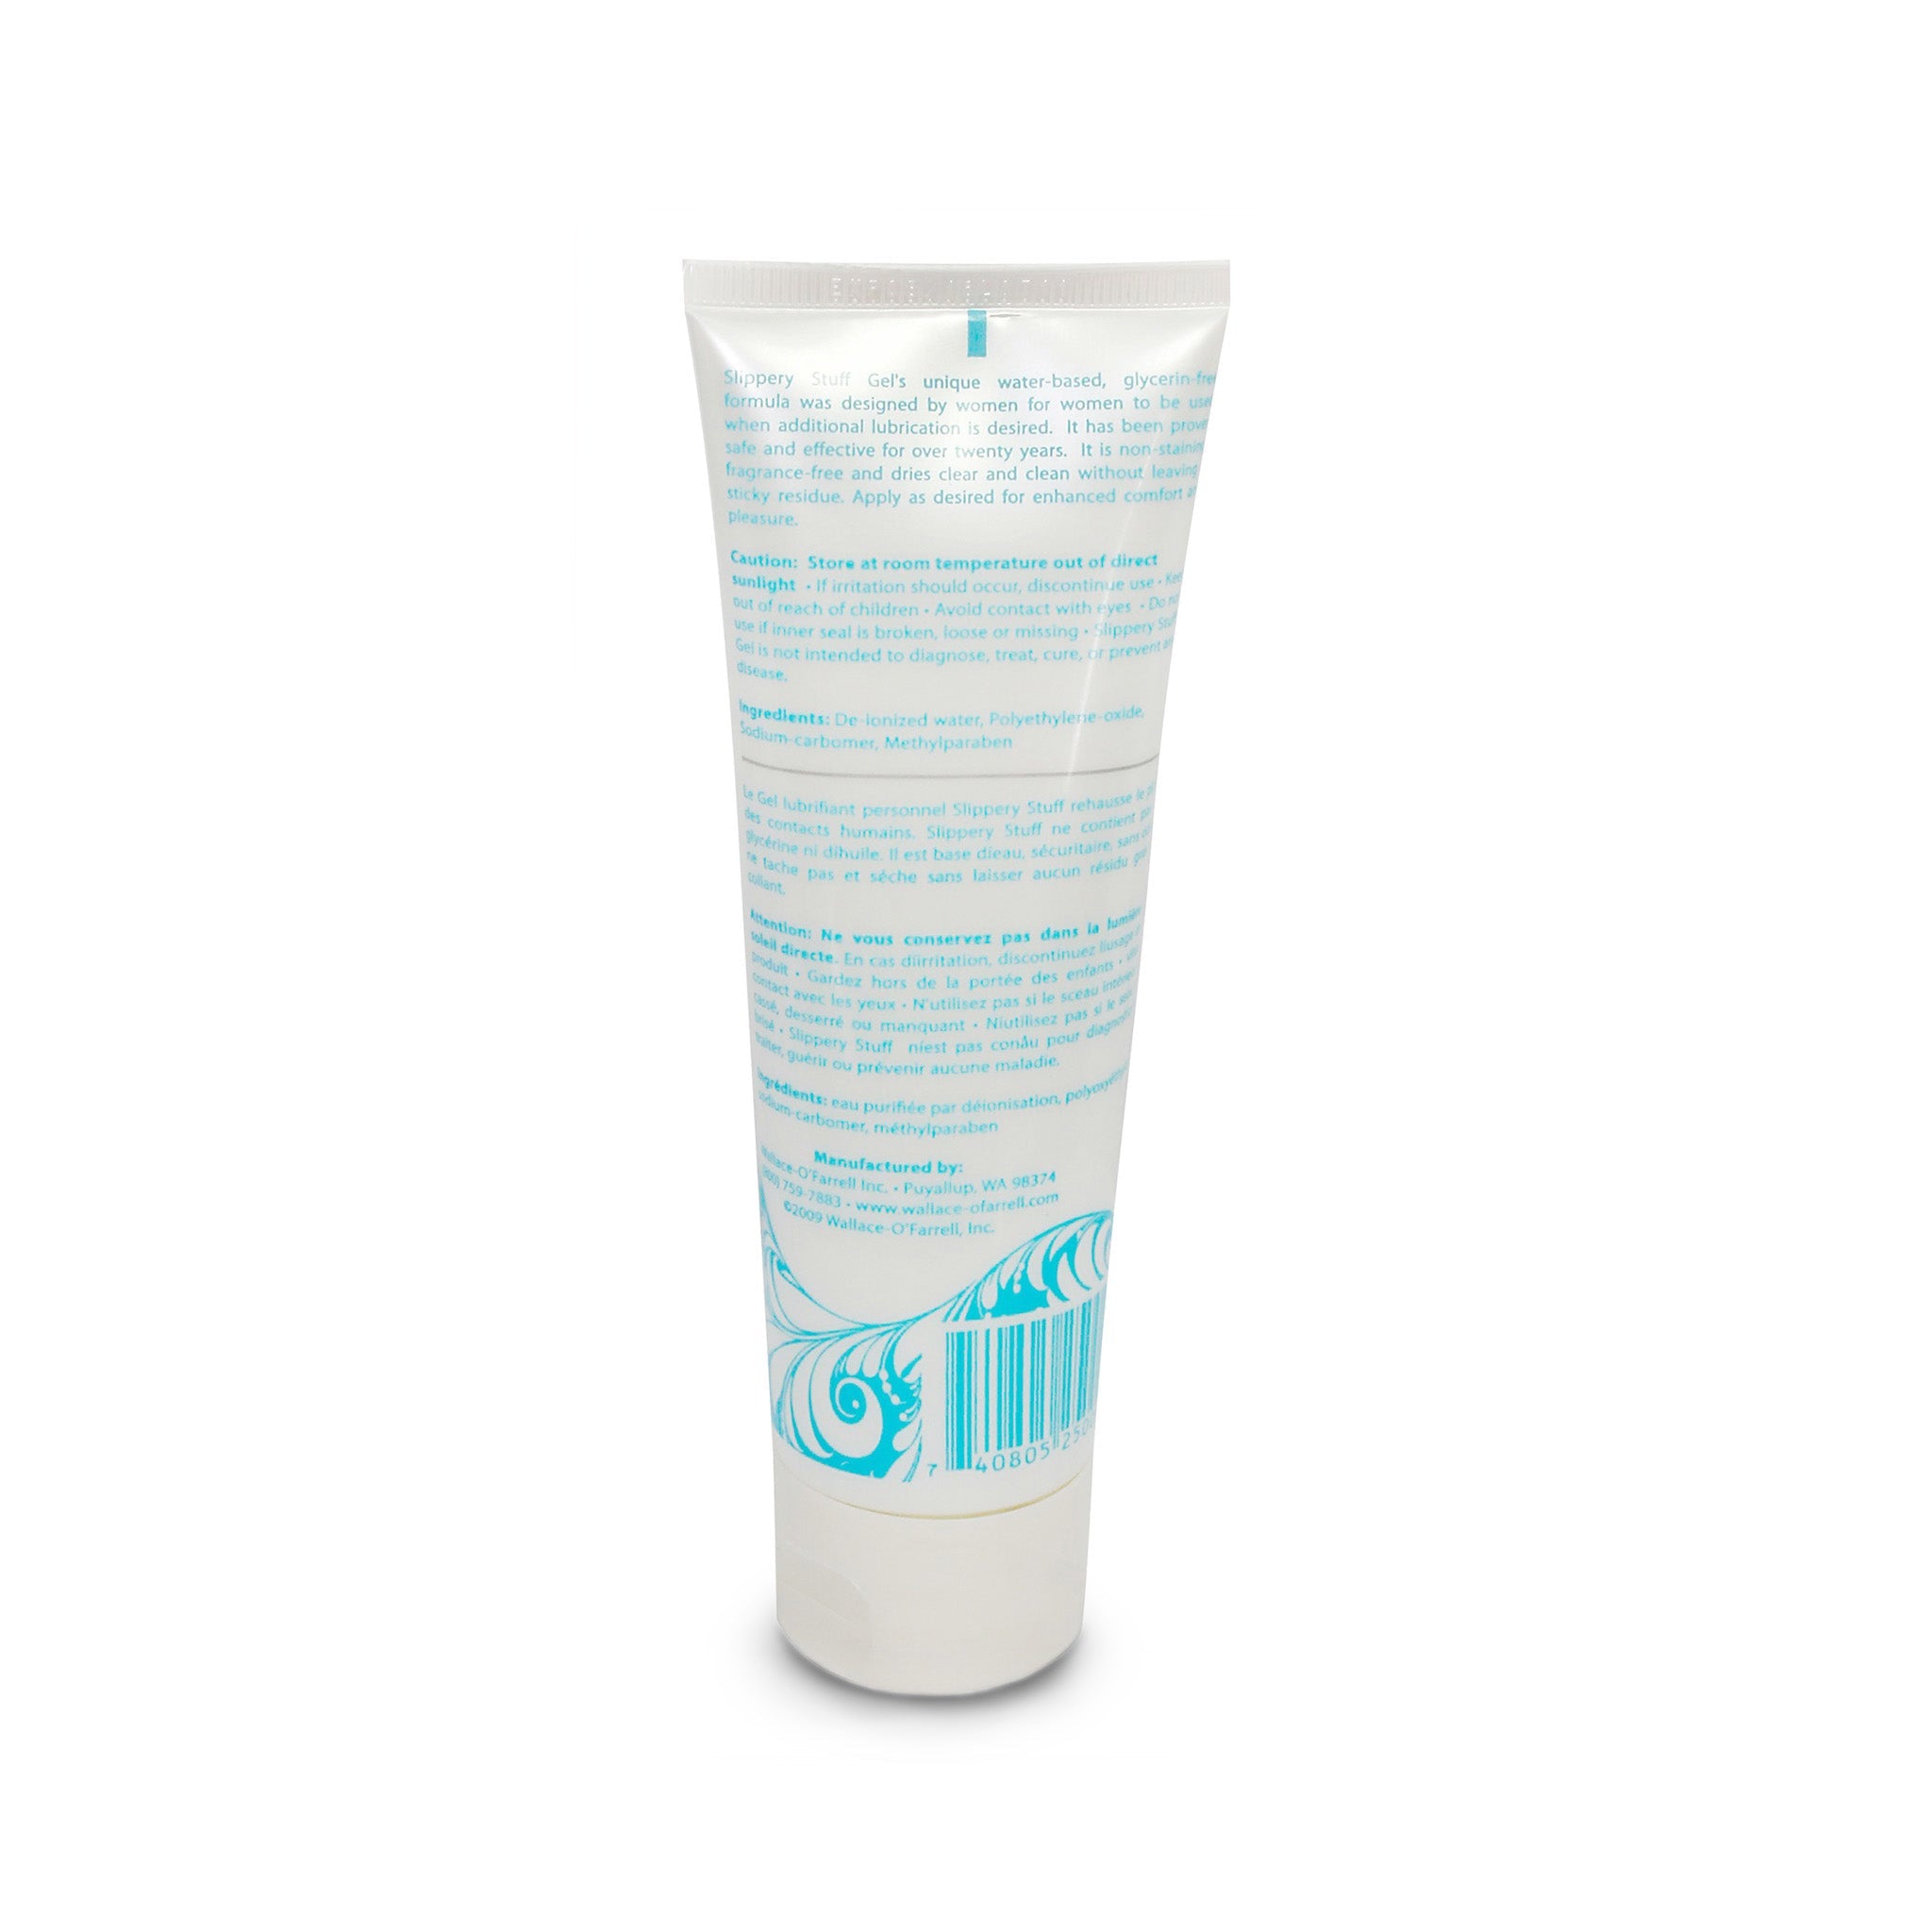 Slippery Stuff Gel Water Based Personal Lubricant Lube 4oz Travel Size